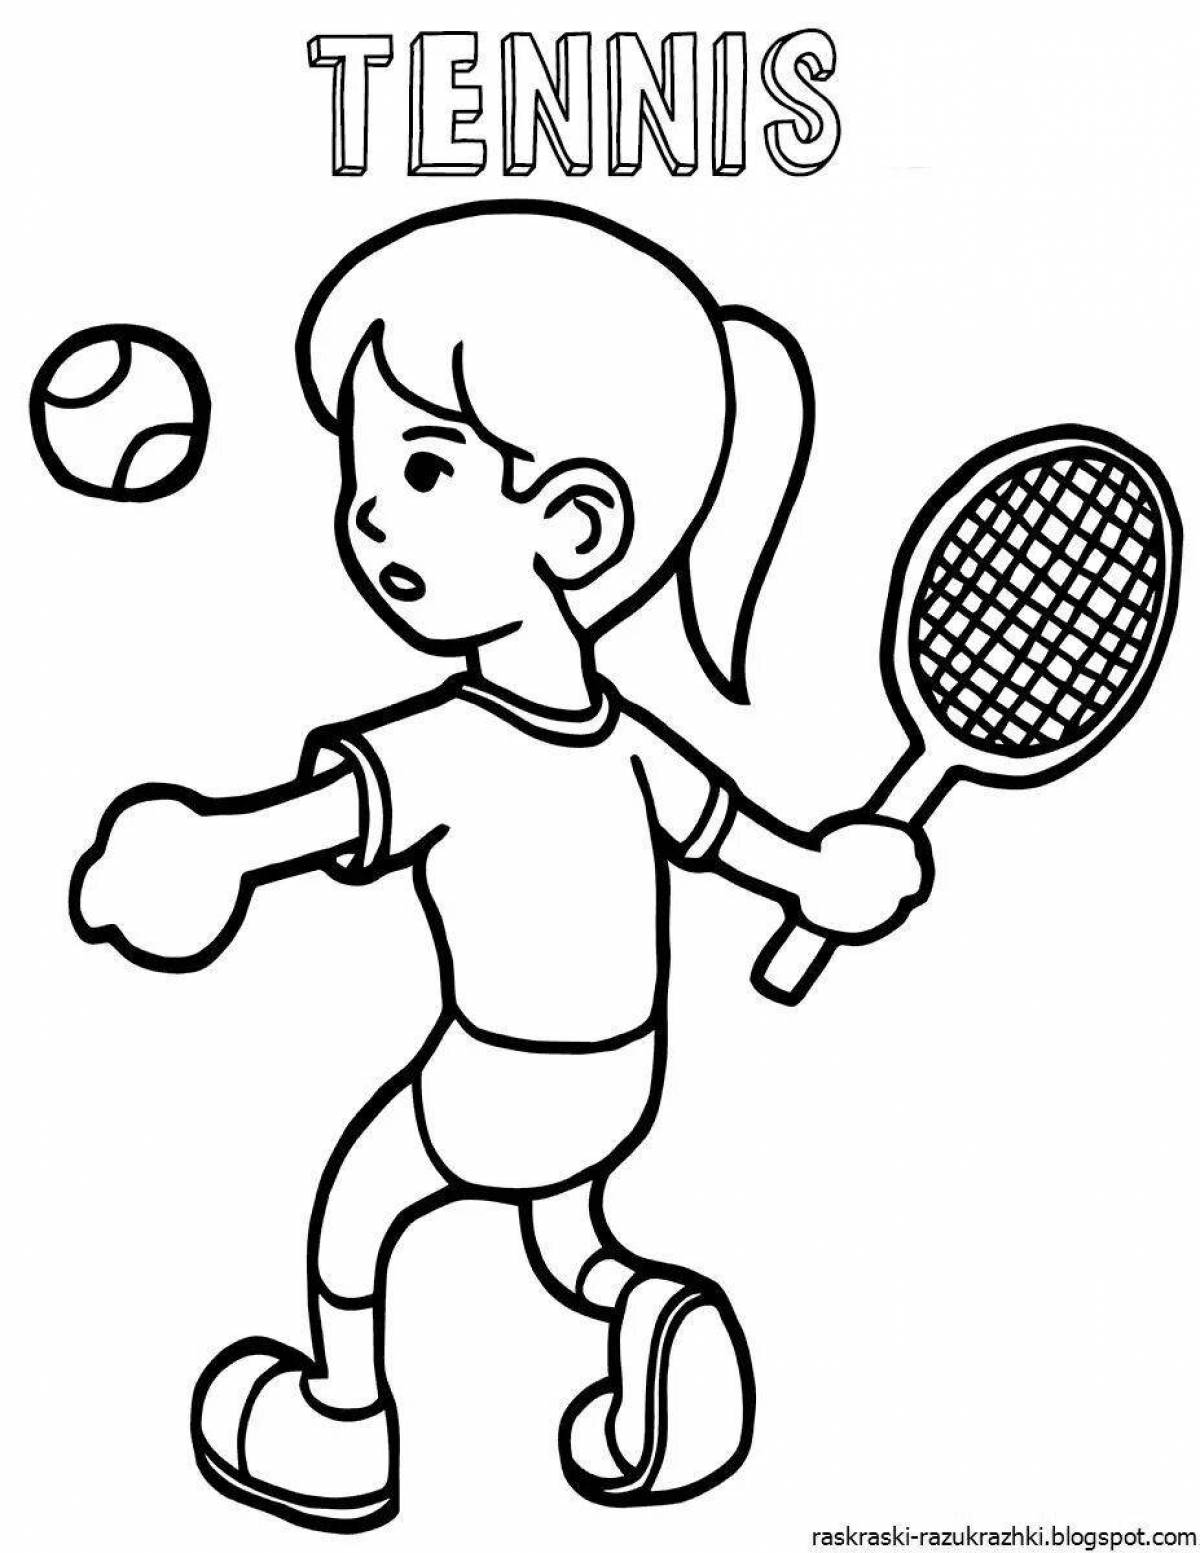 Playful sports coloring book for kids 6-7 years old